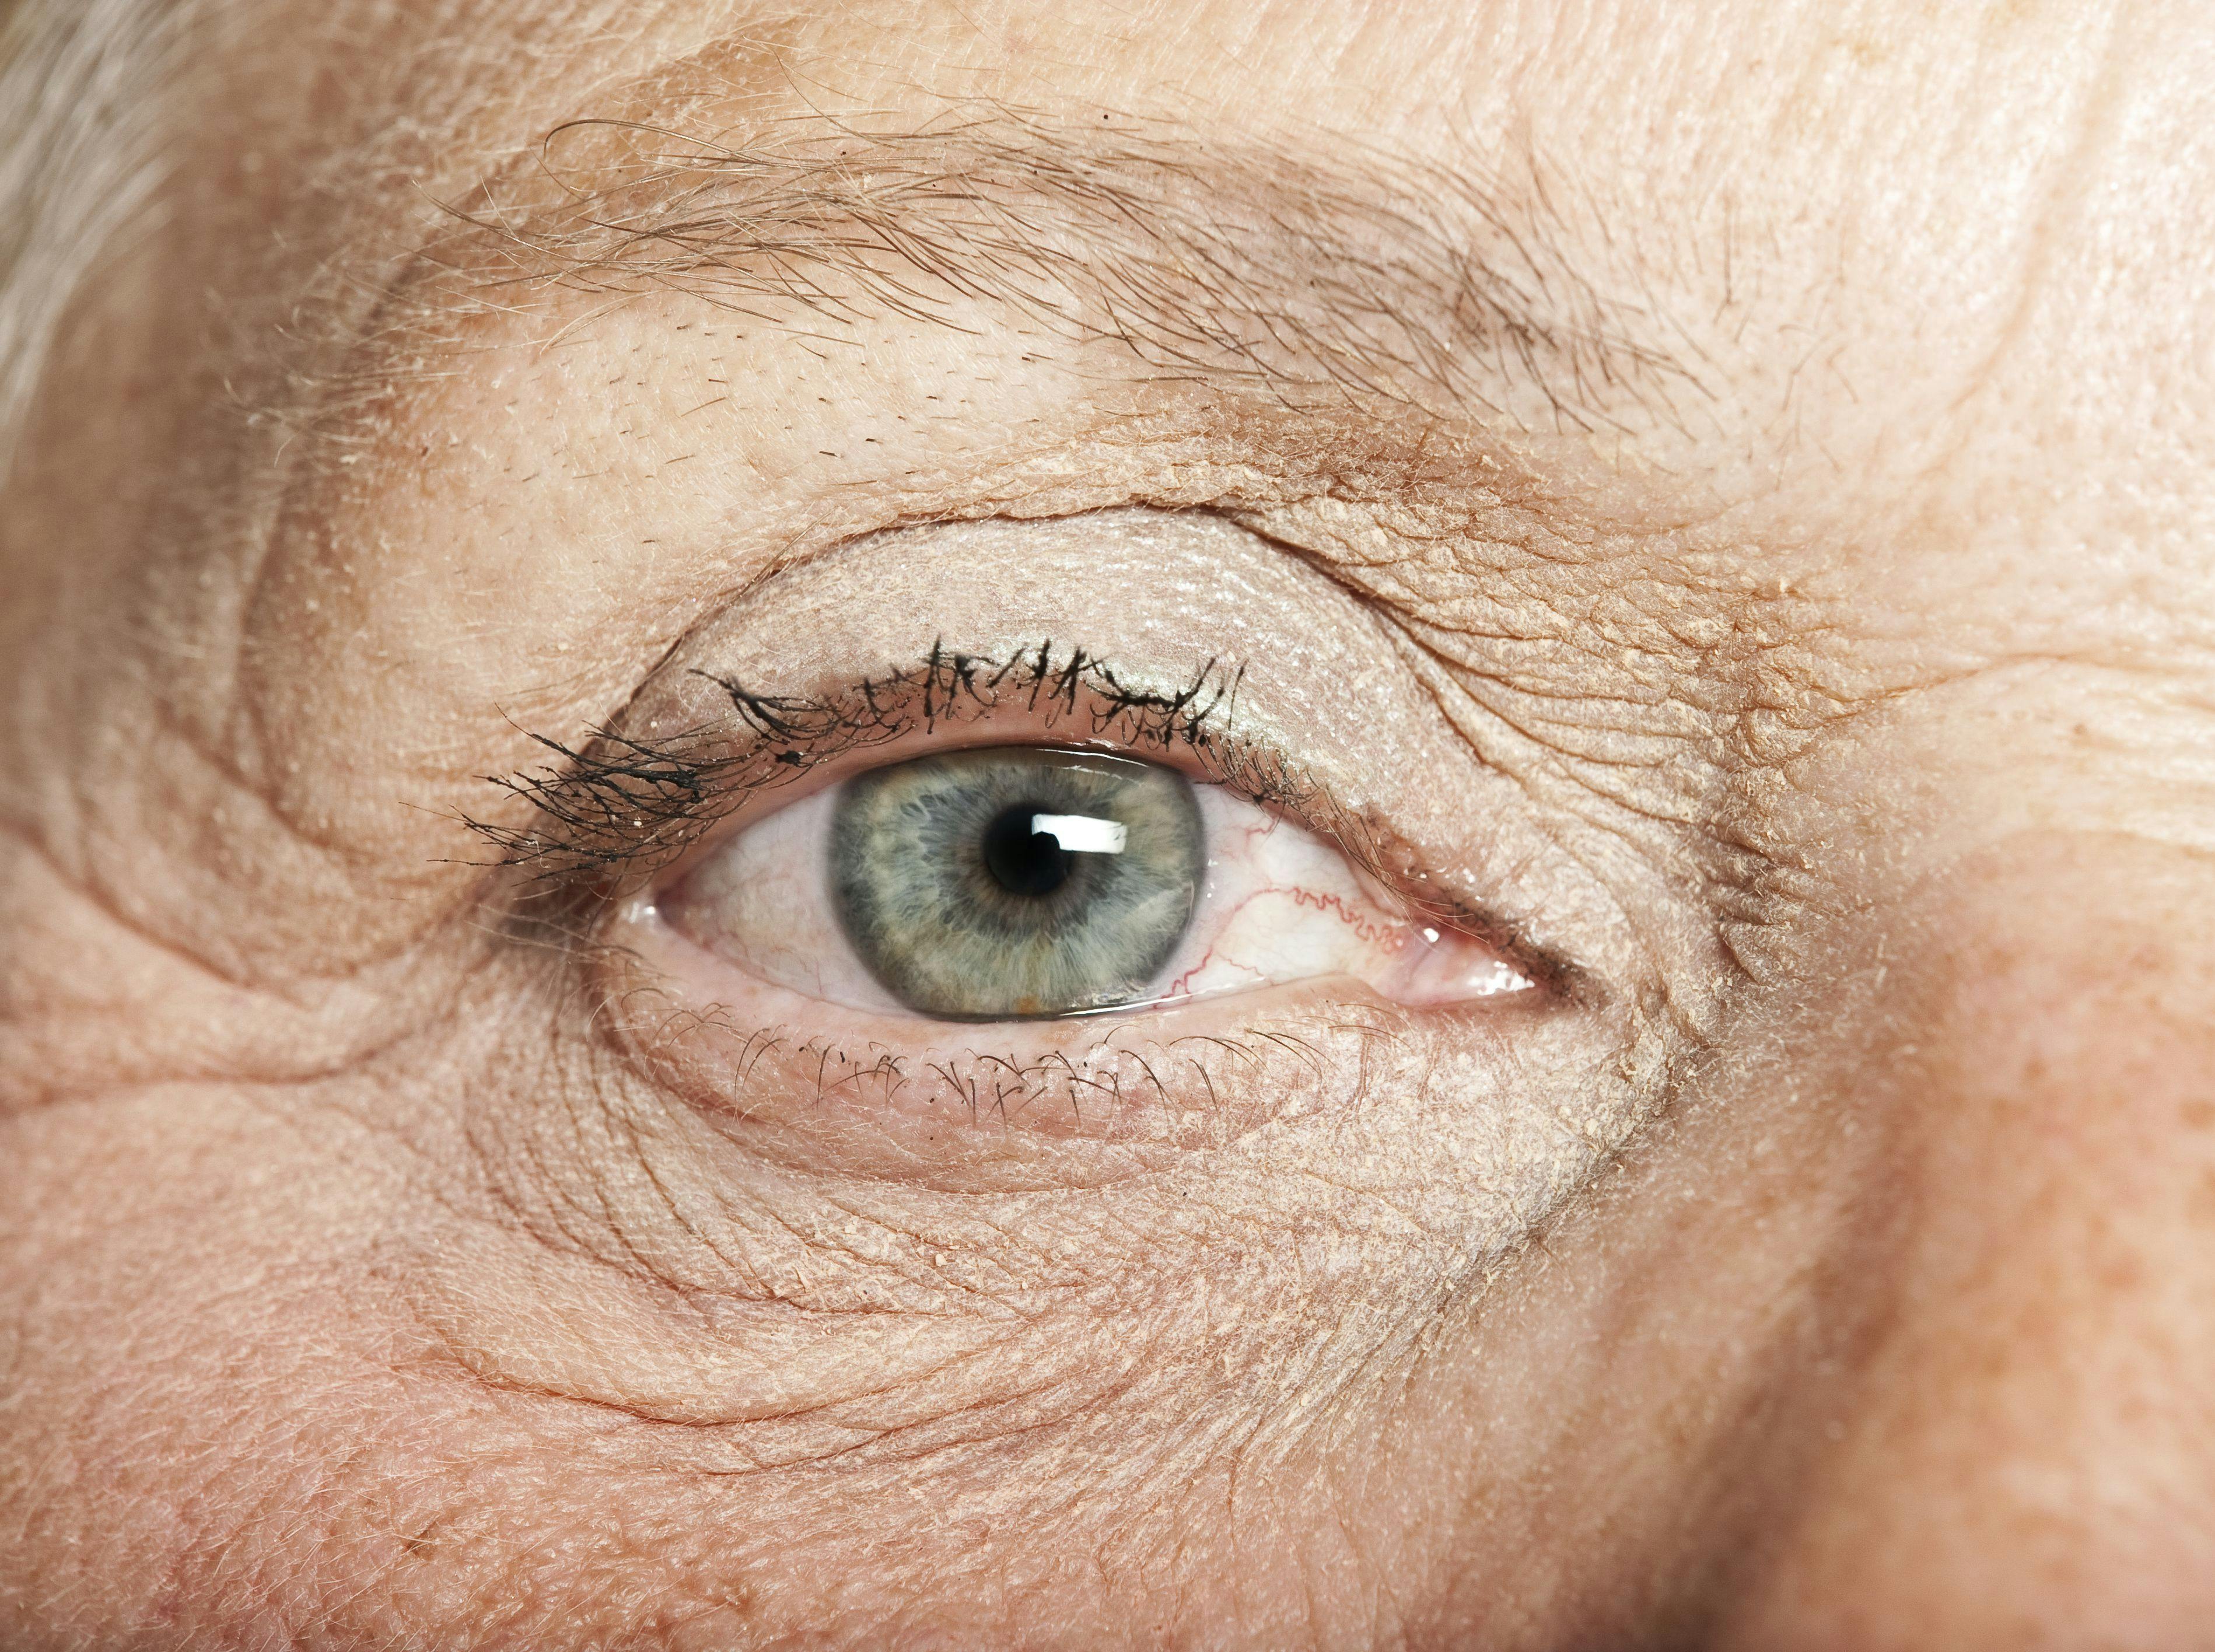 Untreated age-related macular degeneration (AMD) is the leading cause of irreversible blindness or vision loss in people over 60 years of age. Although wet AMD, accounts for only 10% of AMD cases, this subset of the disease results in 90% of legal blindness as a result of AMD.